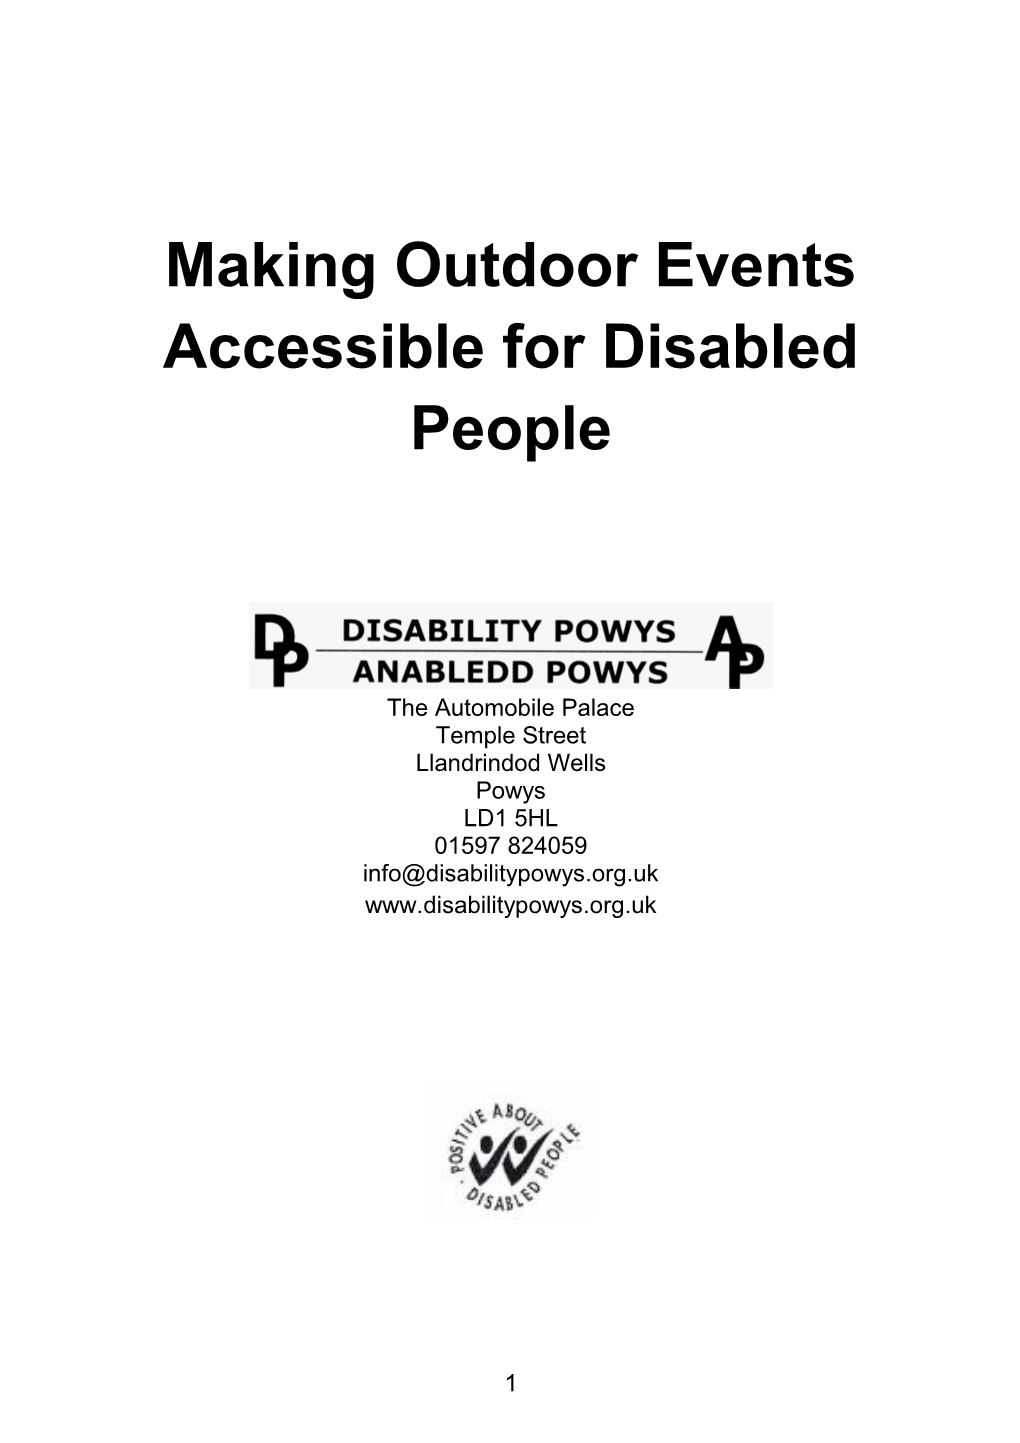 Making Outdoor Events Accessible for Disabled People